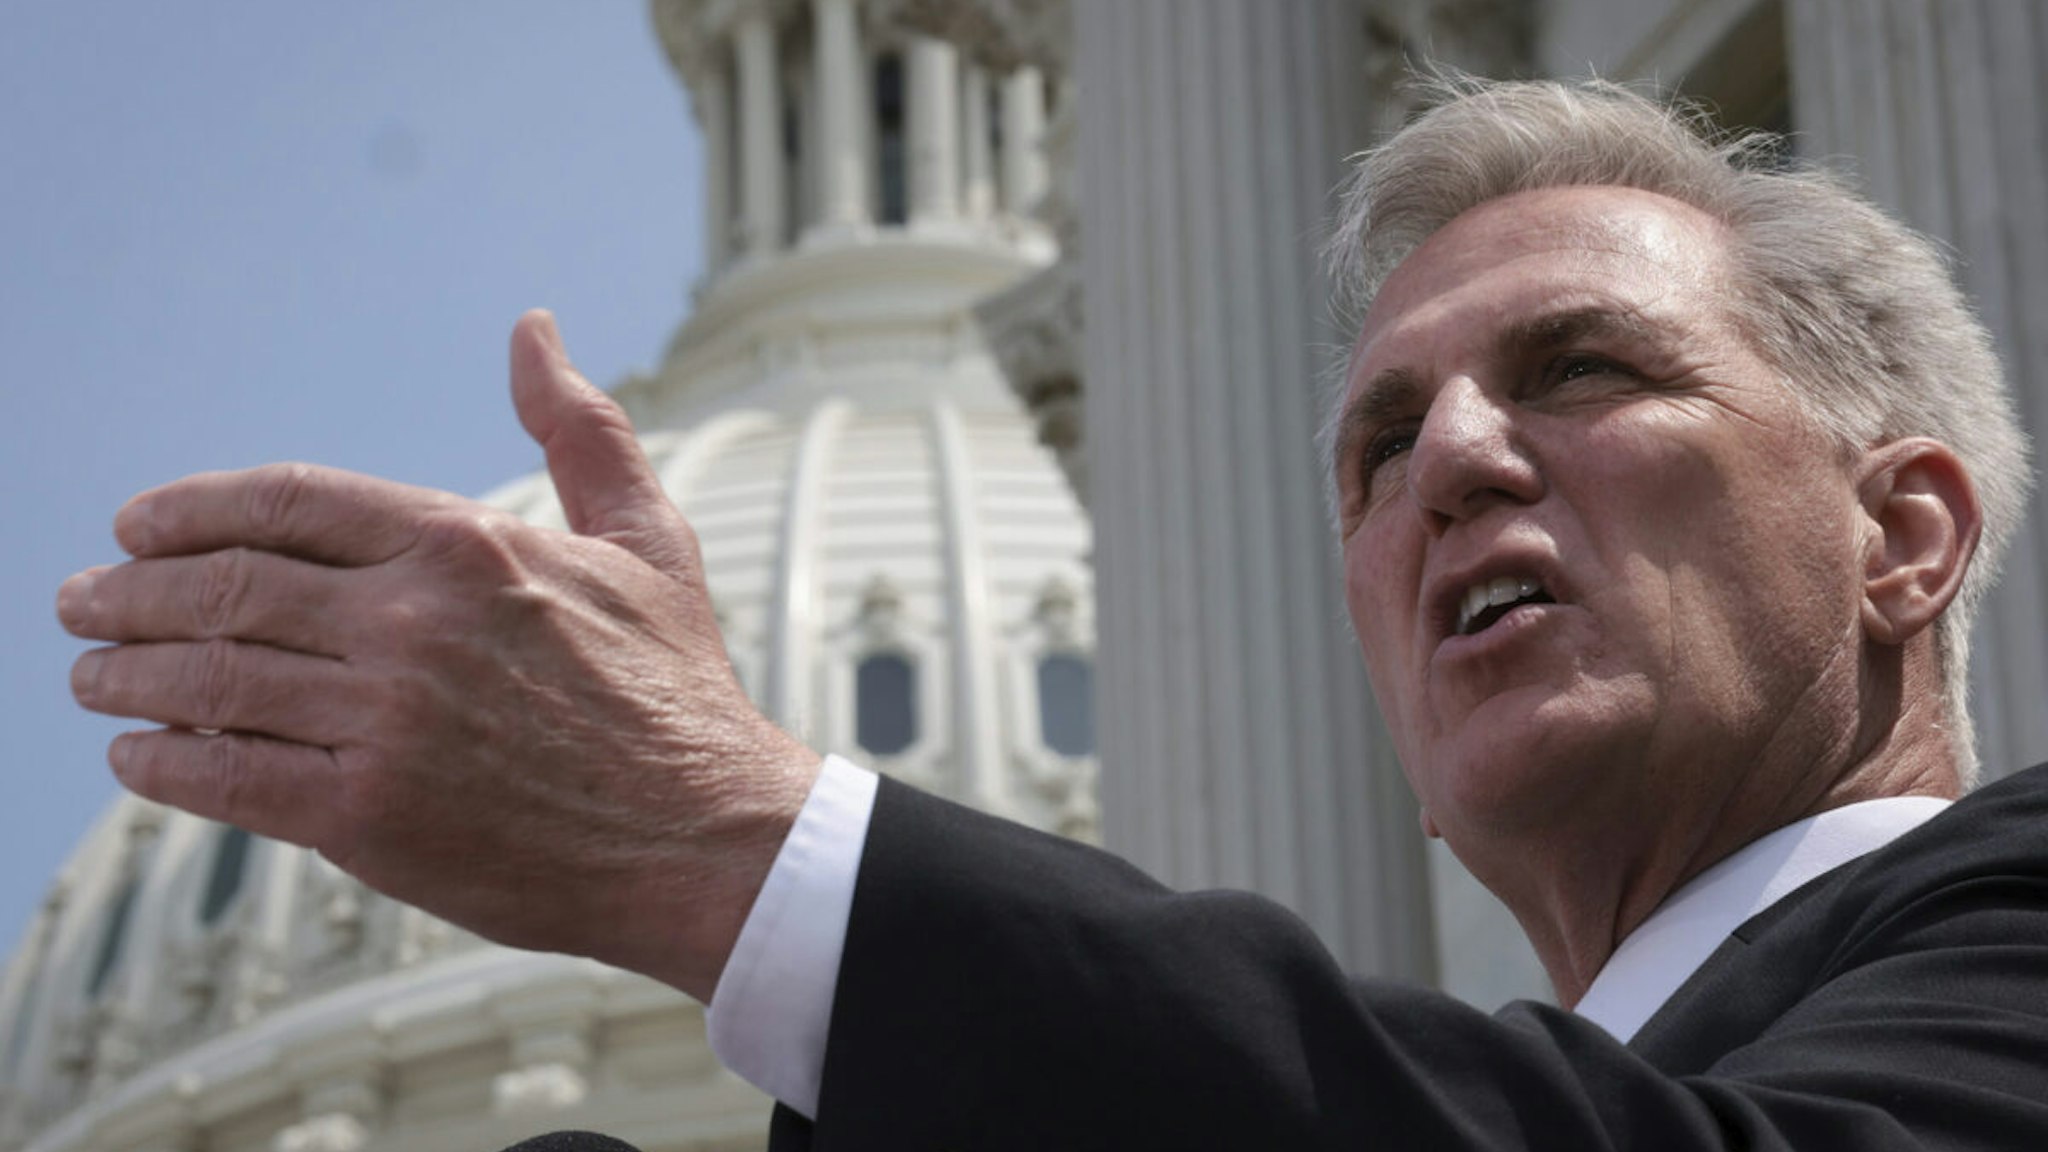 U.S. Speaker of the House Kevin McCarthy (R-CA) speaks during a press conference outside the U.S. Capitol on May 17, 2023 in Washington, DC.